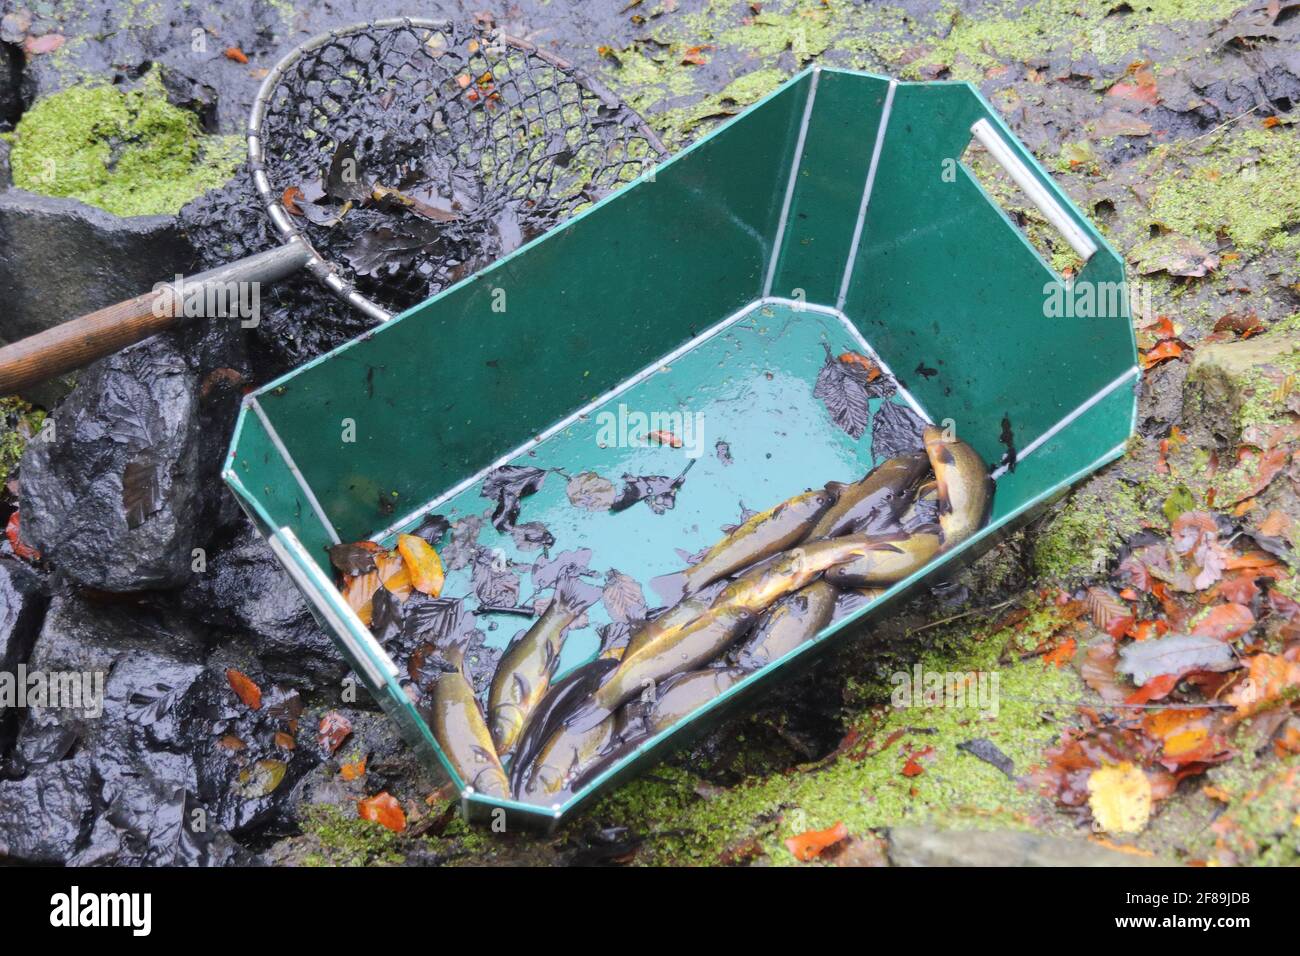 landing net and vat witch tench fish (Tinca tinca) during the harvest of fish pond in autumn Stock Photo